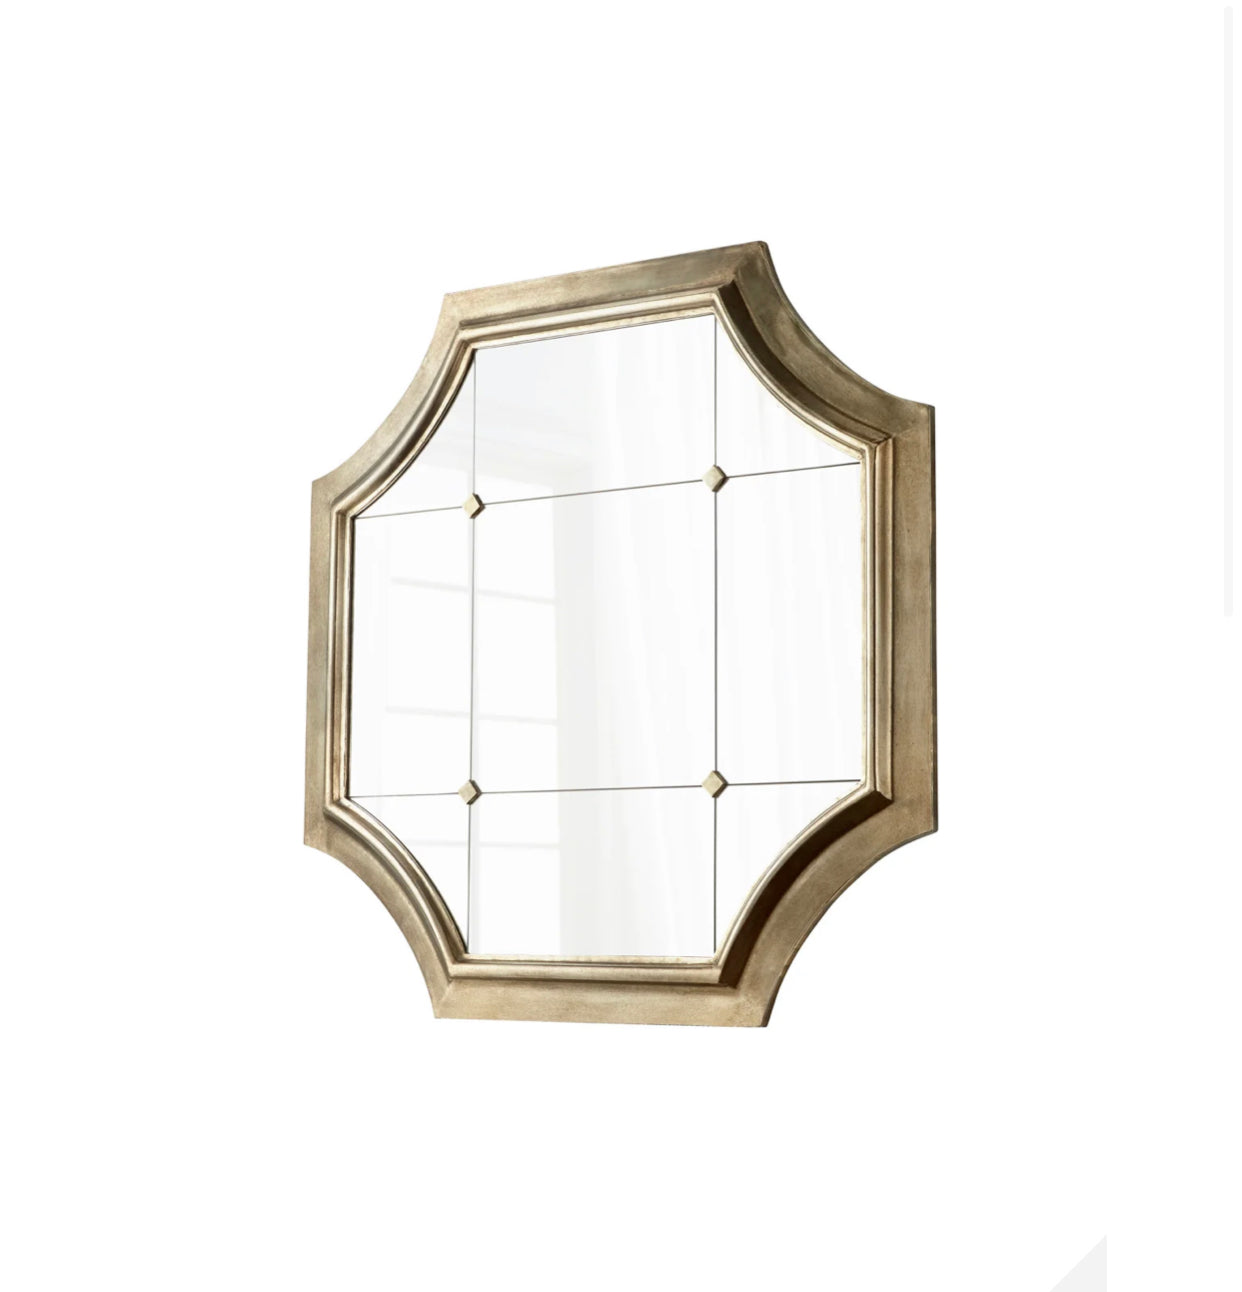 Vasco Mirror | Silver  "Crafted in iron, this classic wall mirror features a traditional quatrefoil silhouette. Complete with crossed accents over mirrored glass, the piece features an iron frame in a silver finish. Beautifully decorative in a chic living room or stylish entry."  Dimensions: L 50.00 X W 50.00 X H 2.25  Weight: 52.45 lbs.  Finish: Silver Materials: Iron and Mirrored Glass